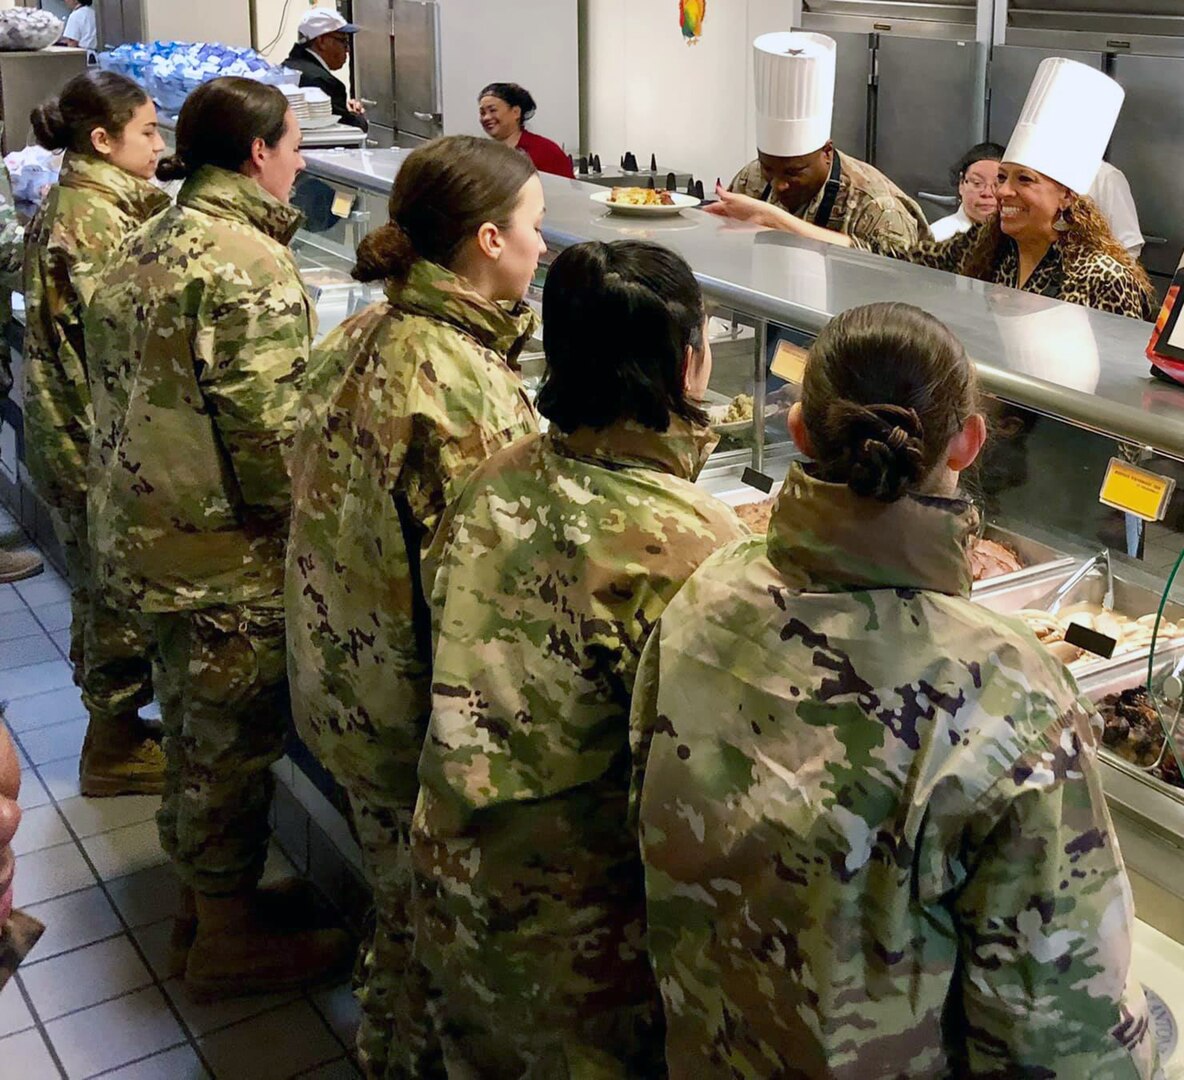 Col. Devin R. Pepper (on line, center), commander, 460th Space Wing, Buckley Air Force Base, Colorado, helps dish out Thanksgiving meals to Airmen in basic training at Joint Base San Antonio-Lackland Nov. 28. Pepper served as the reviewing official at the Air Force Basic Military Training parade Nov. 29.